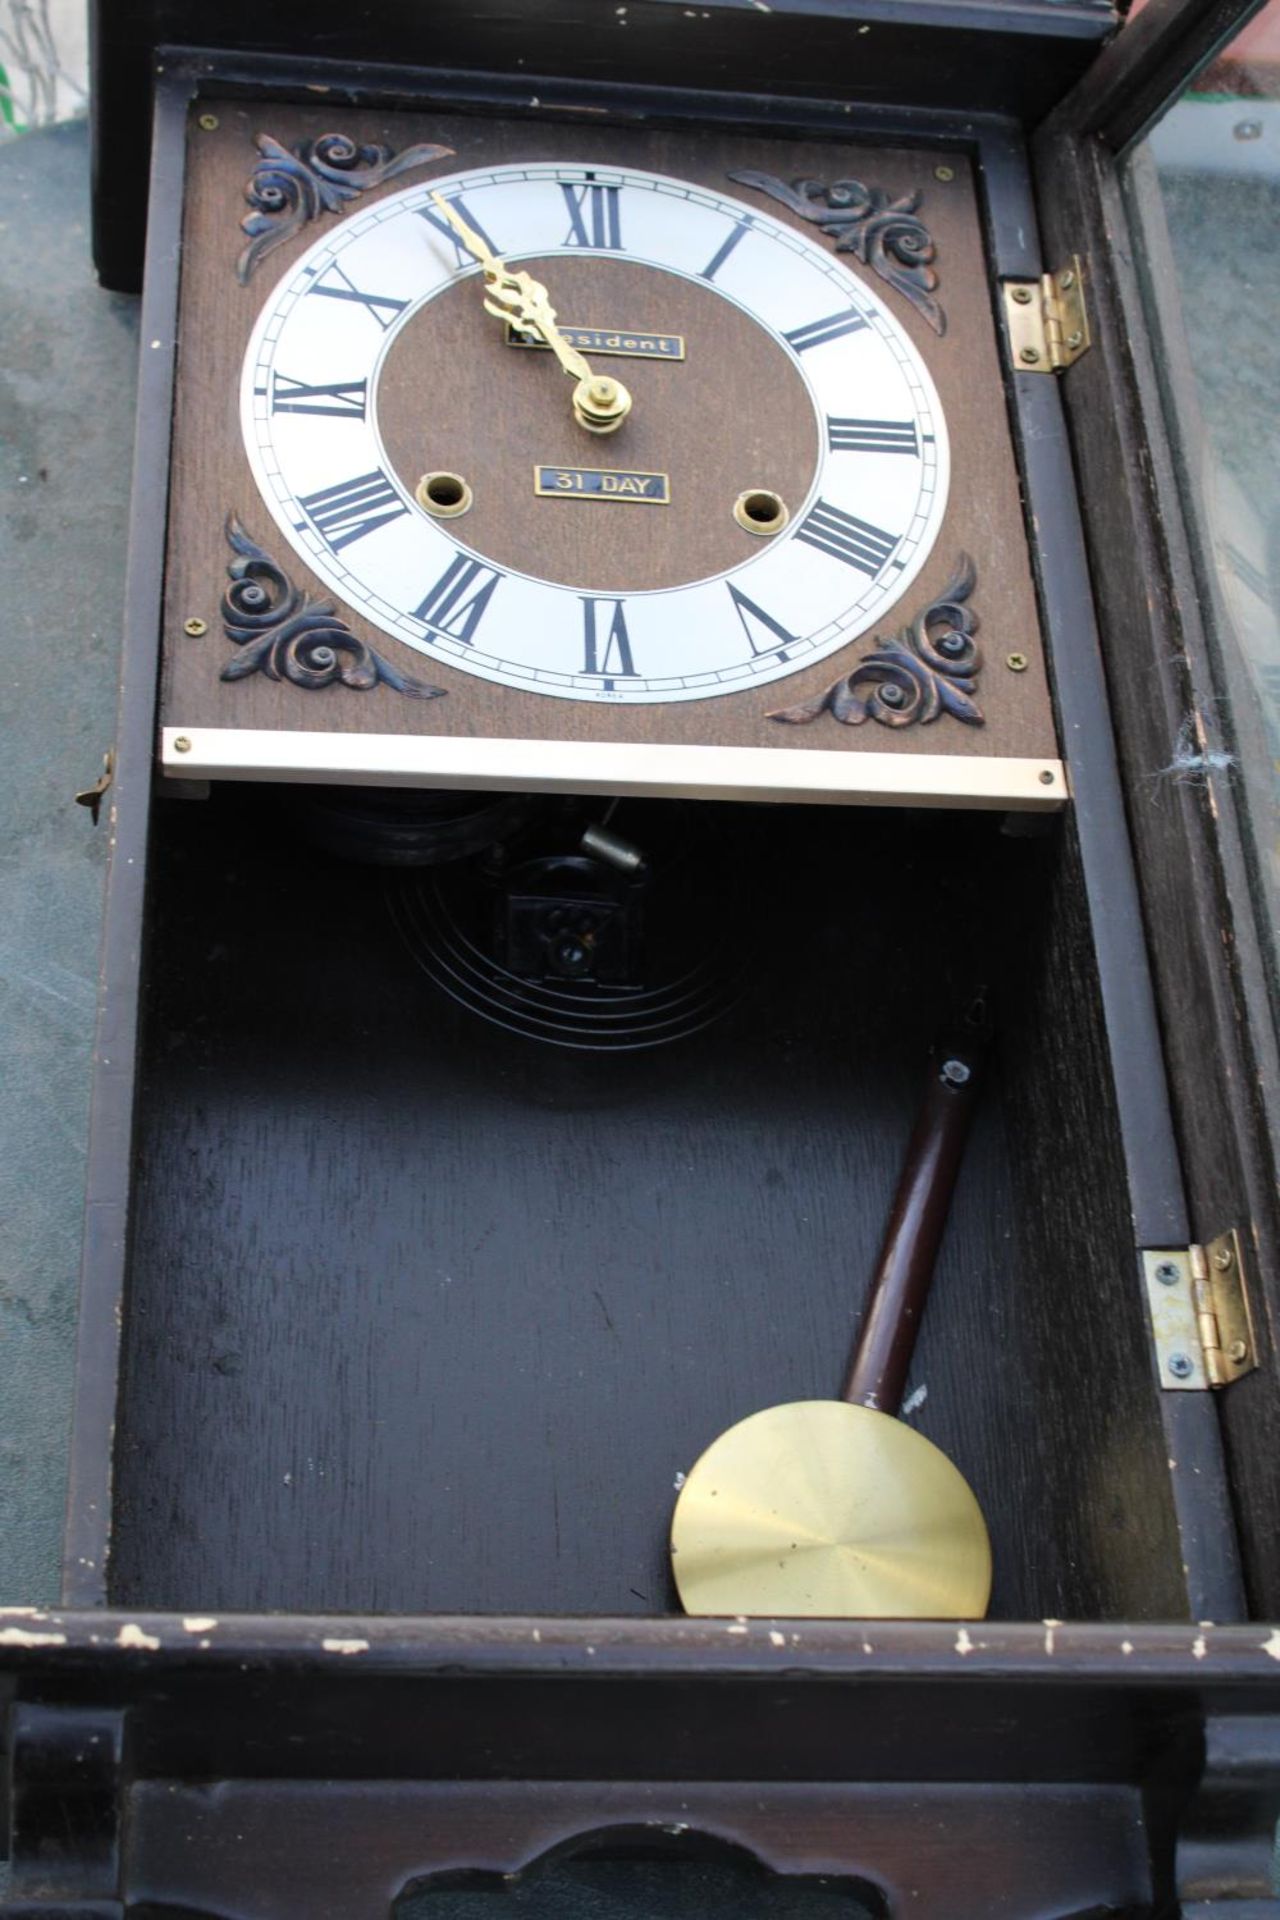 A 31 DAY CHIMING WALL CLOCK - Image 3 of 3